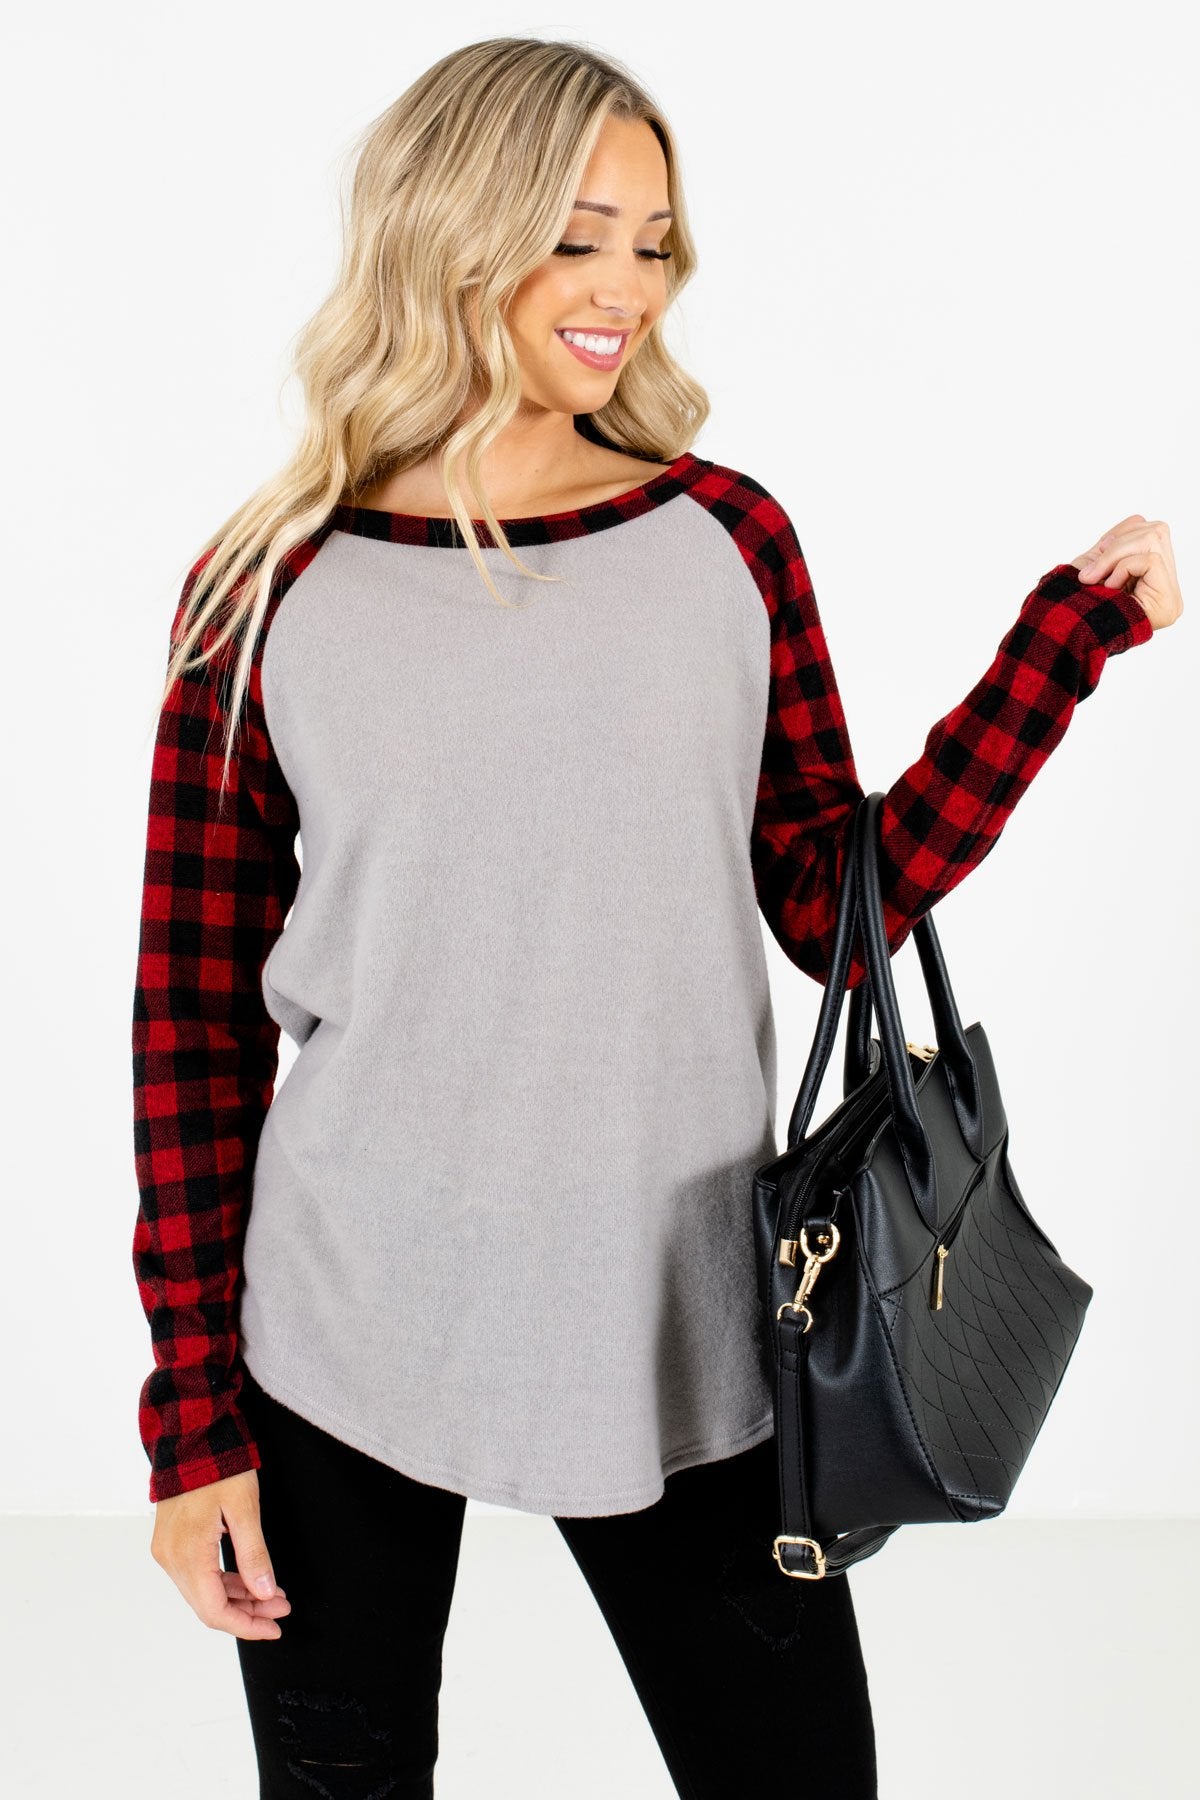 Women’s Red Warm and Cozy Boutique Tops